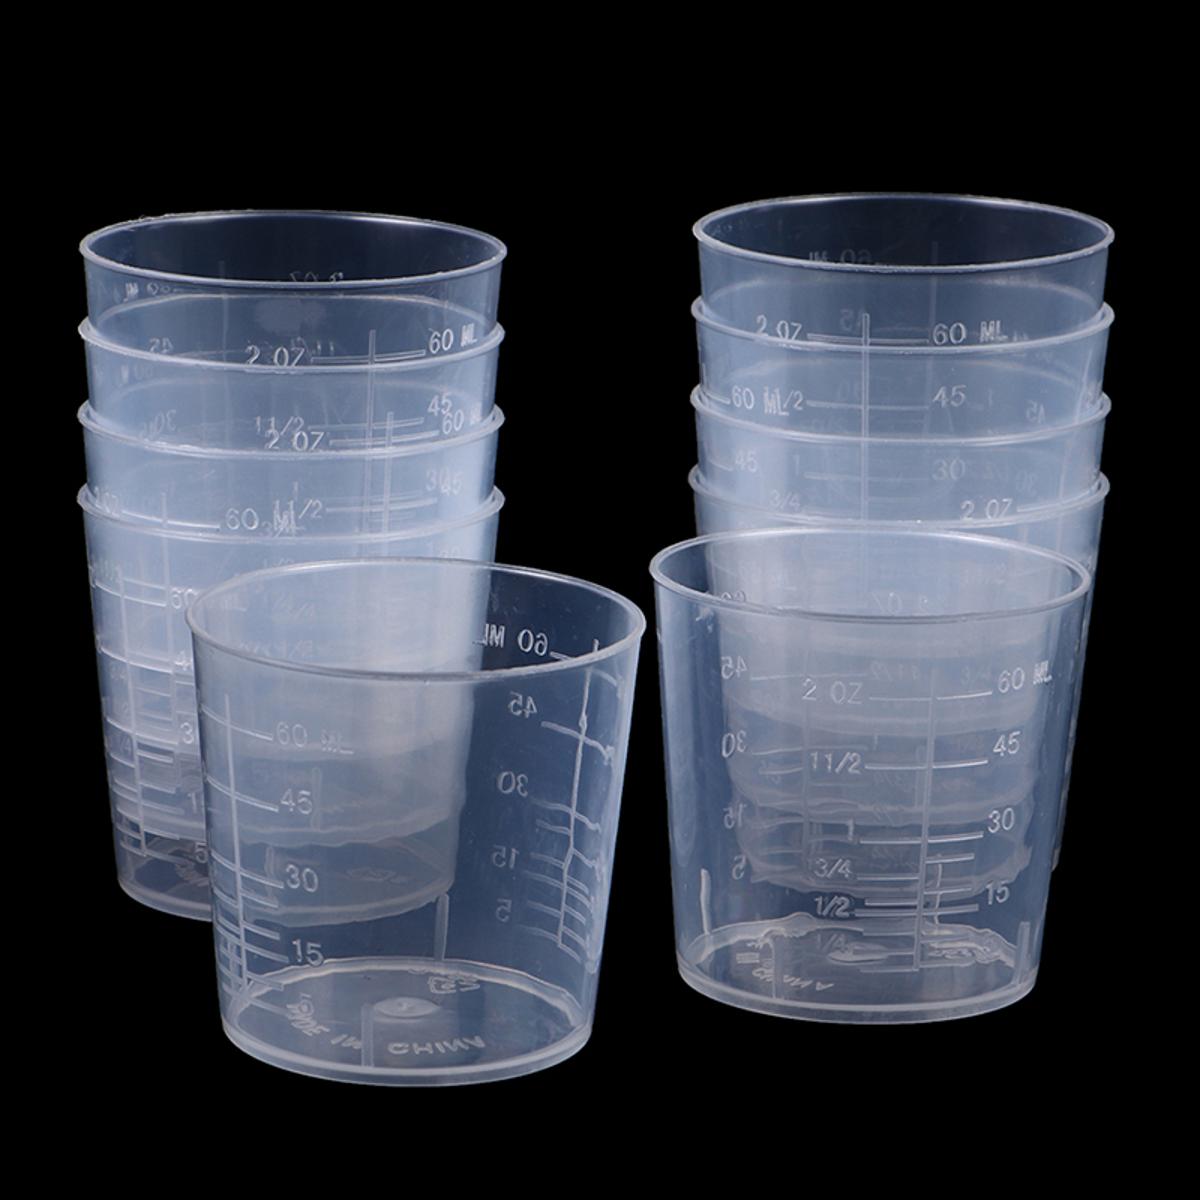 1pc 30 ML Glass Measuring Cup With Scale Shot Glass Liquid Glass Ounce Cup!